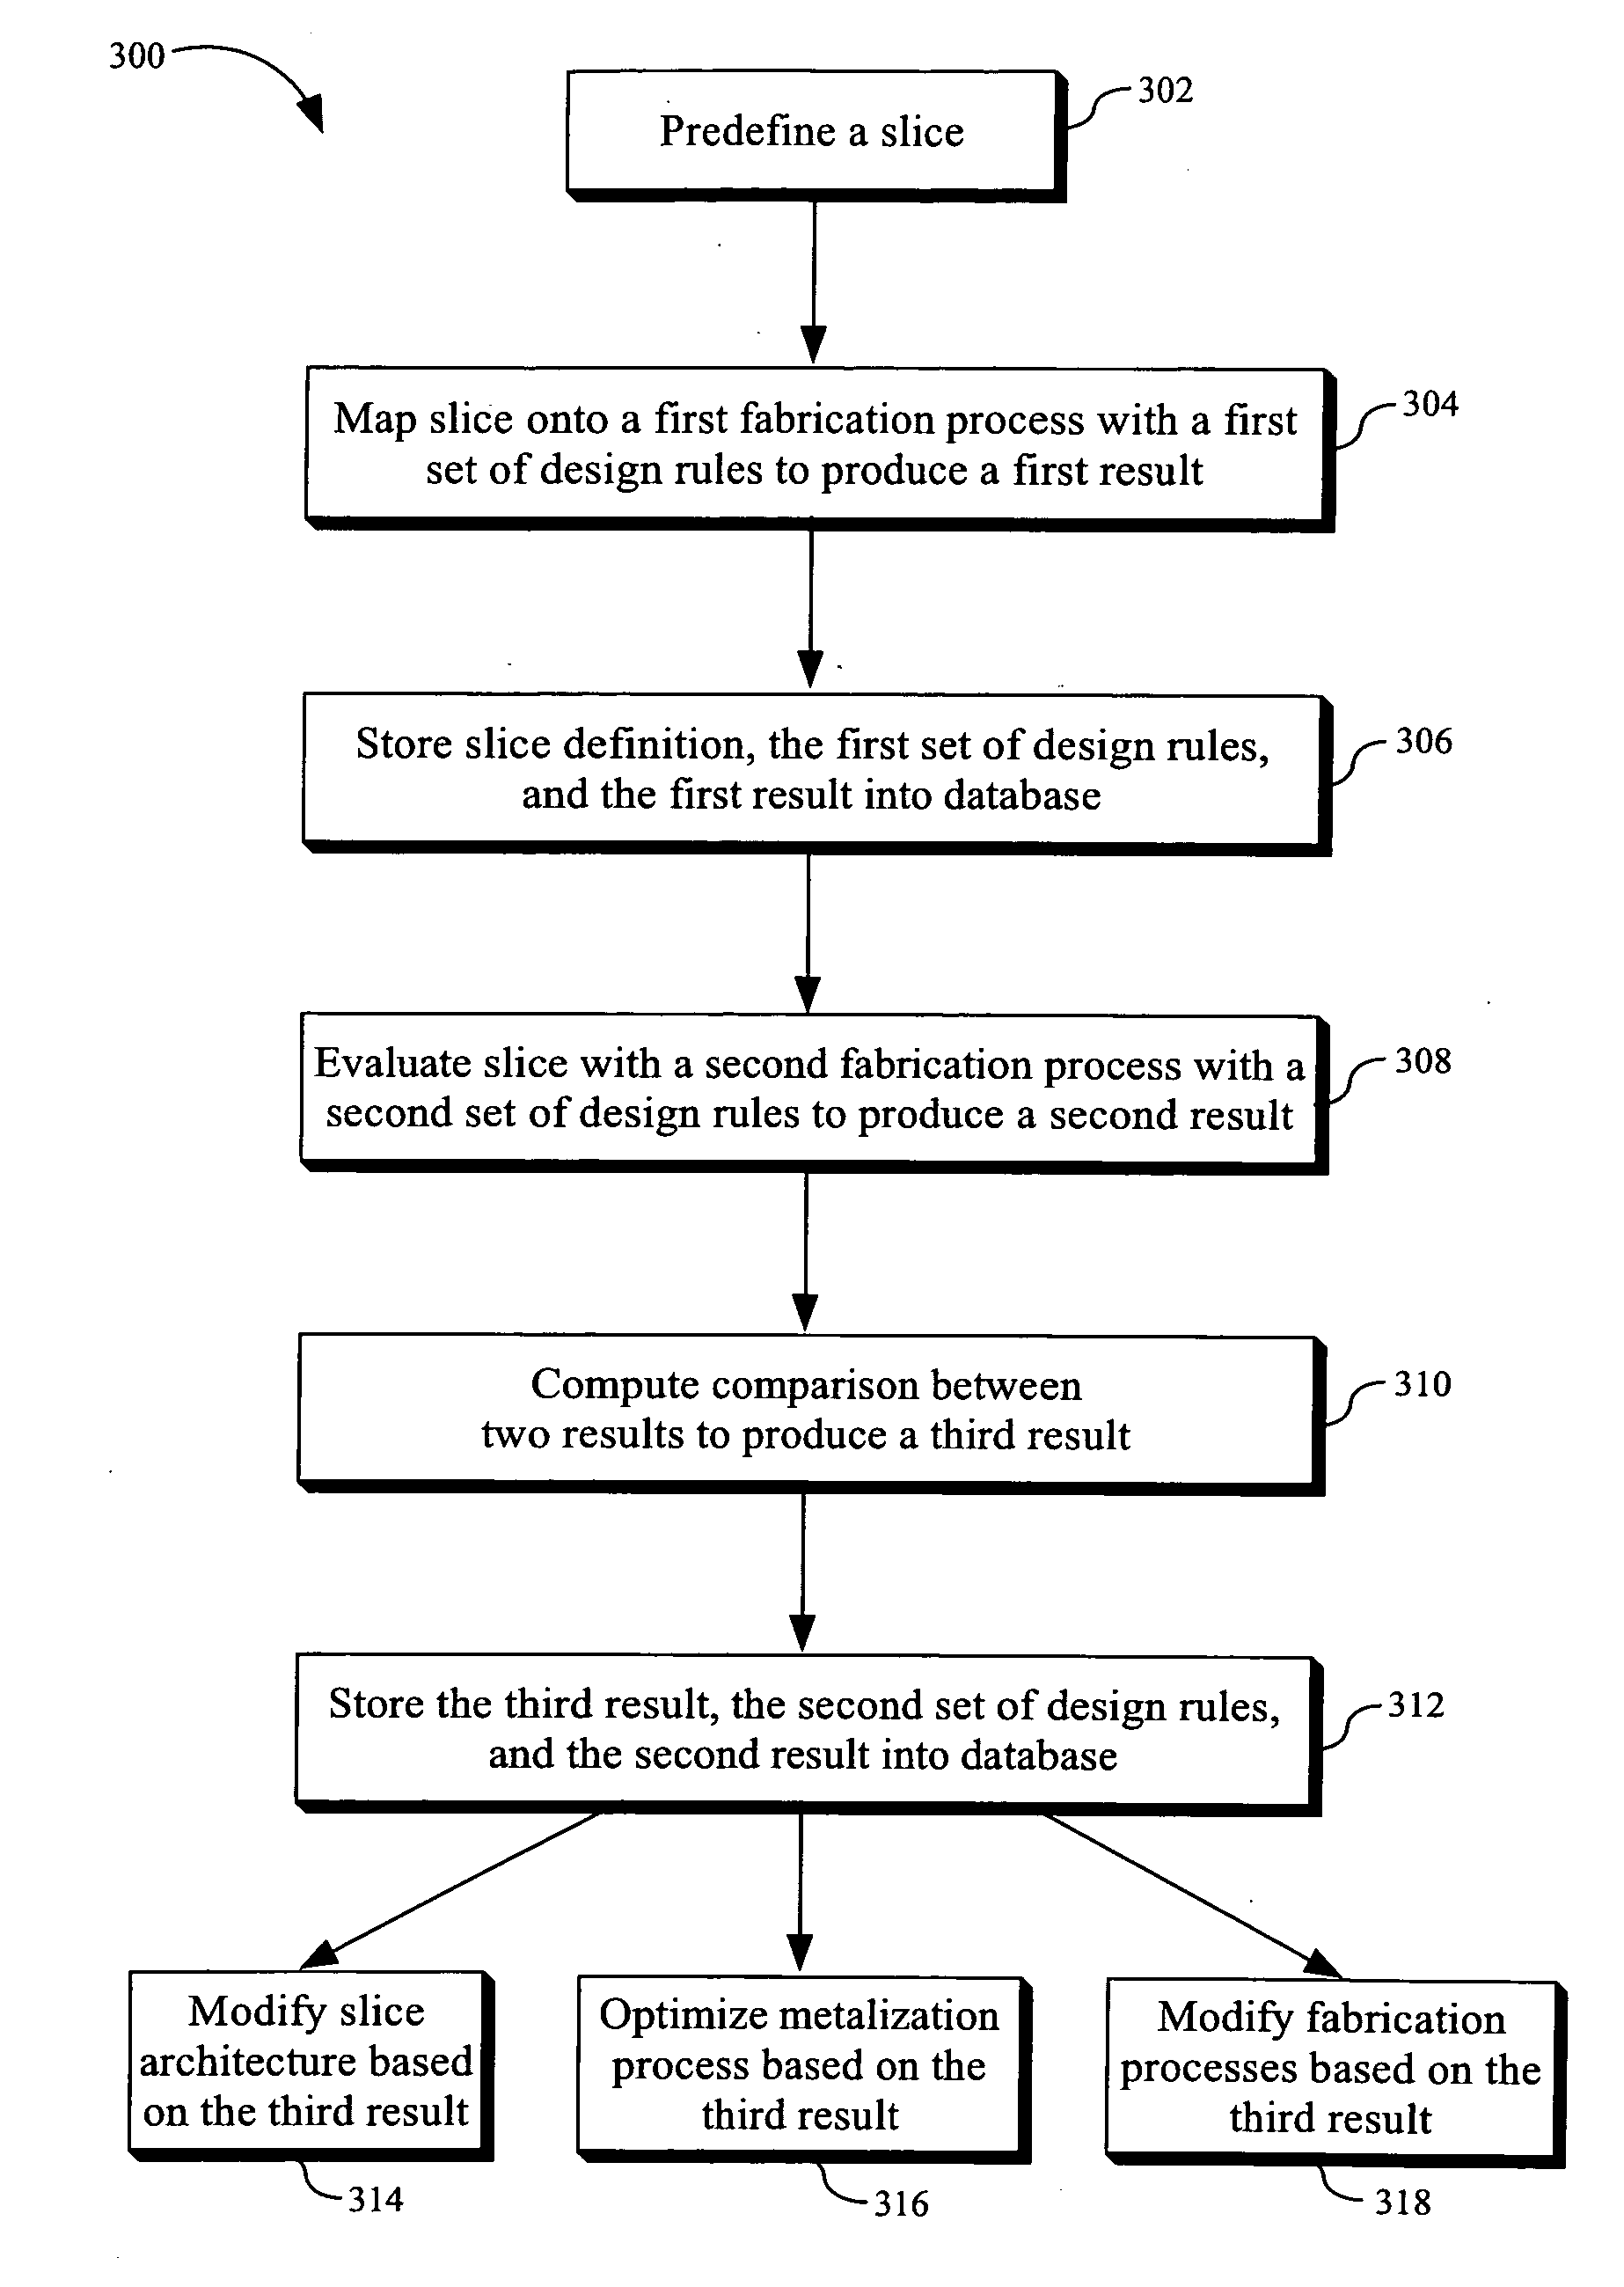 Method and apparatus for mapping platform-based design to multiple foundry processes